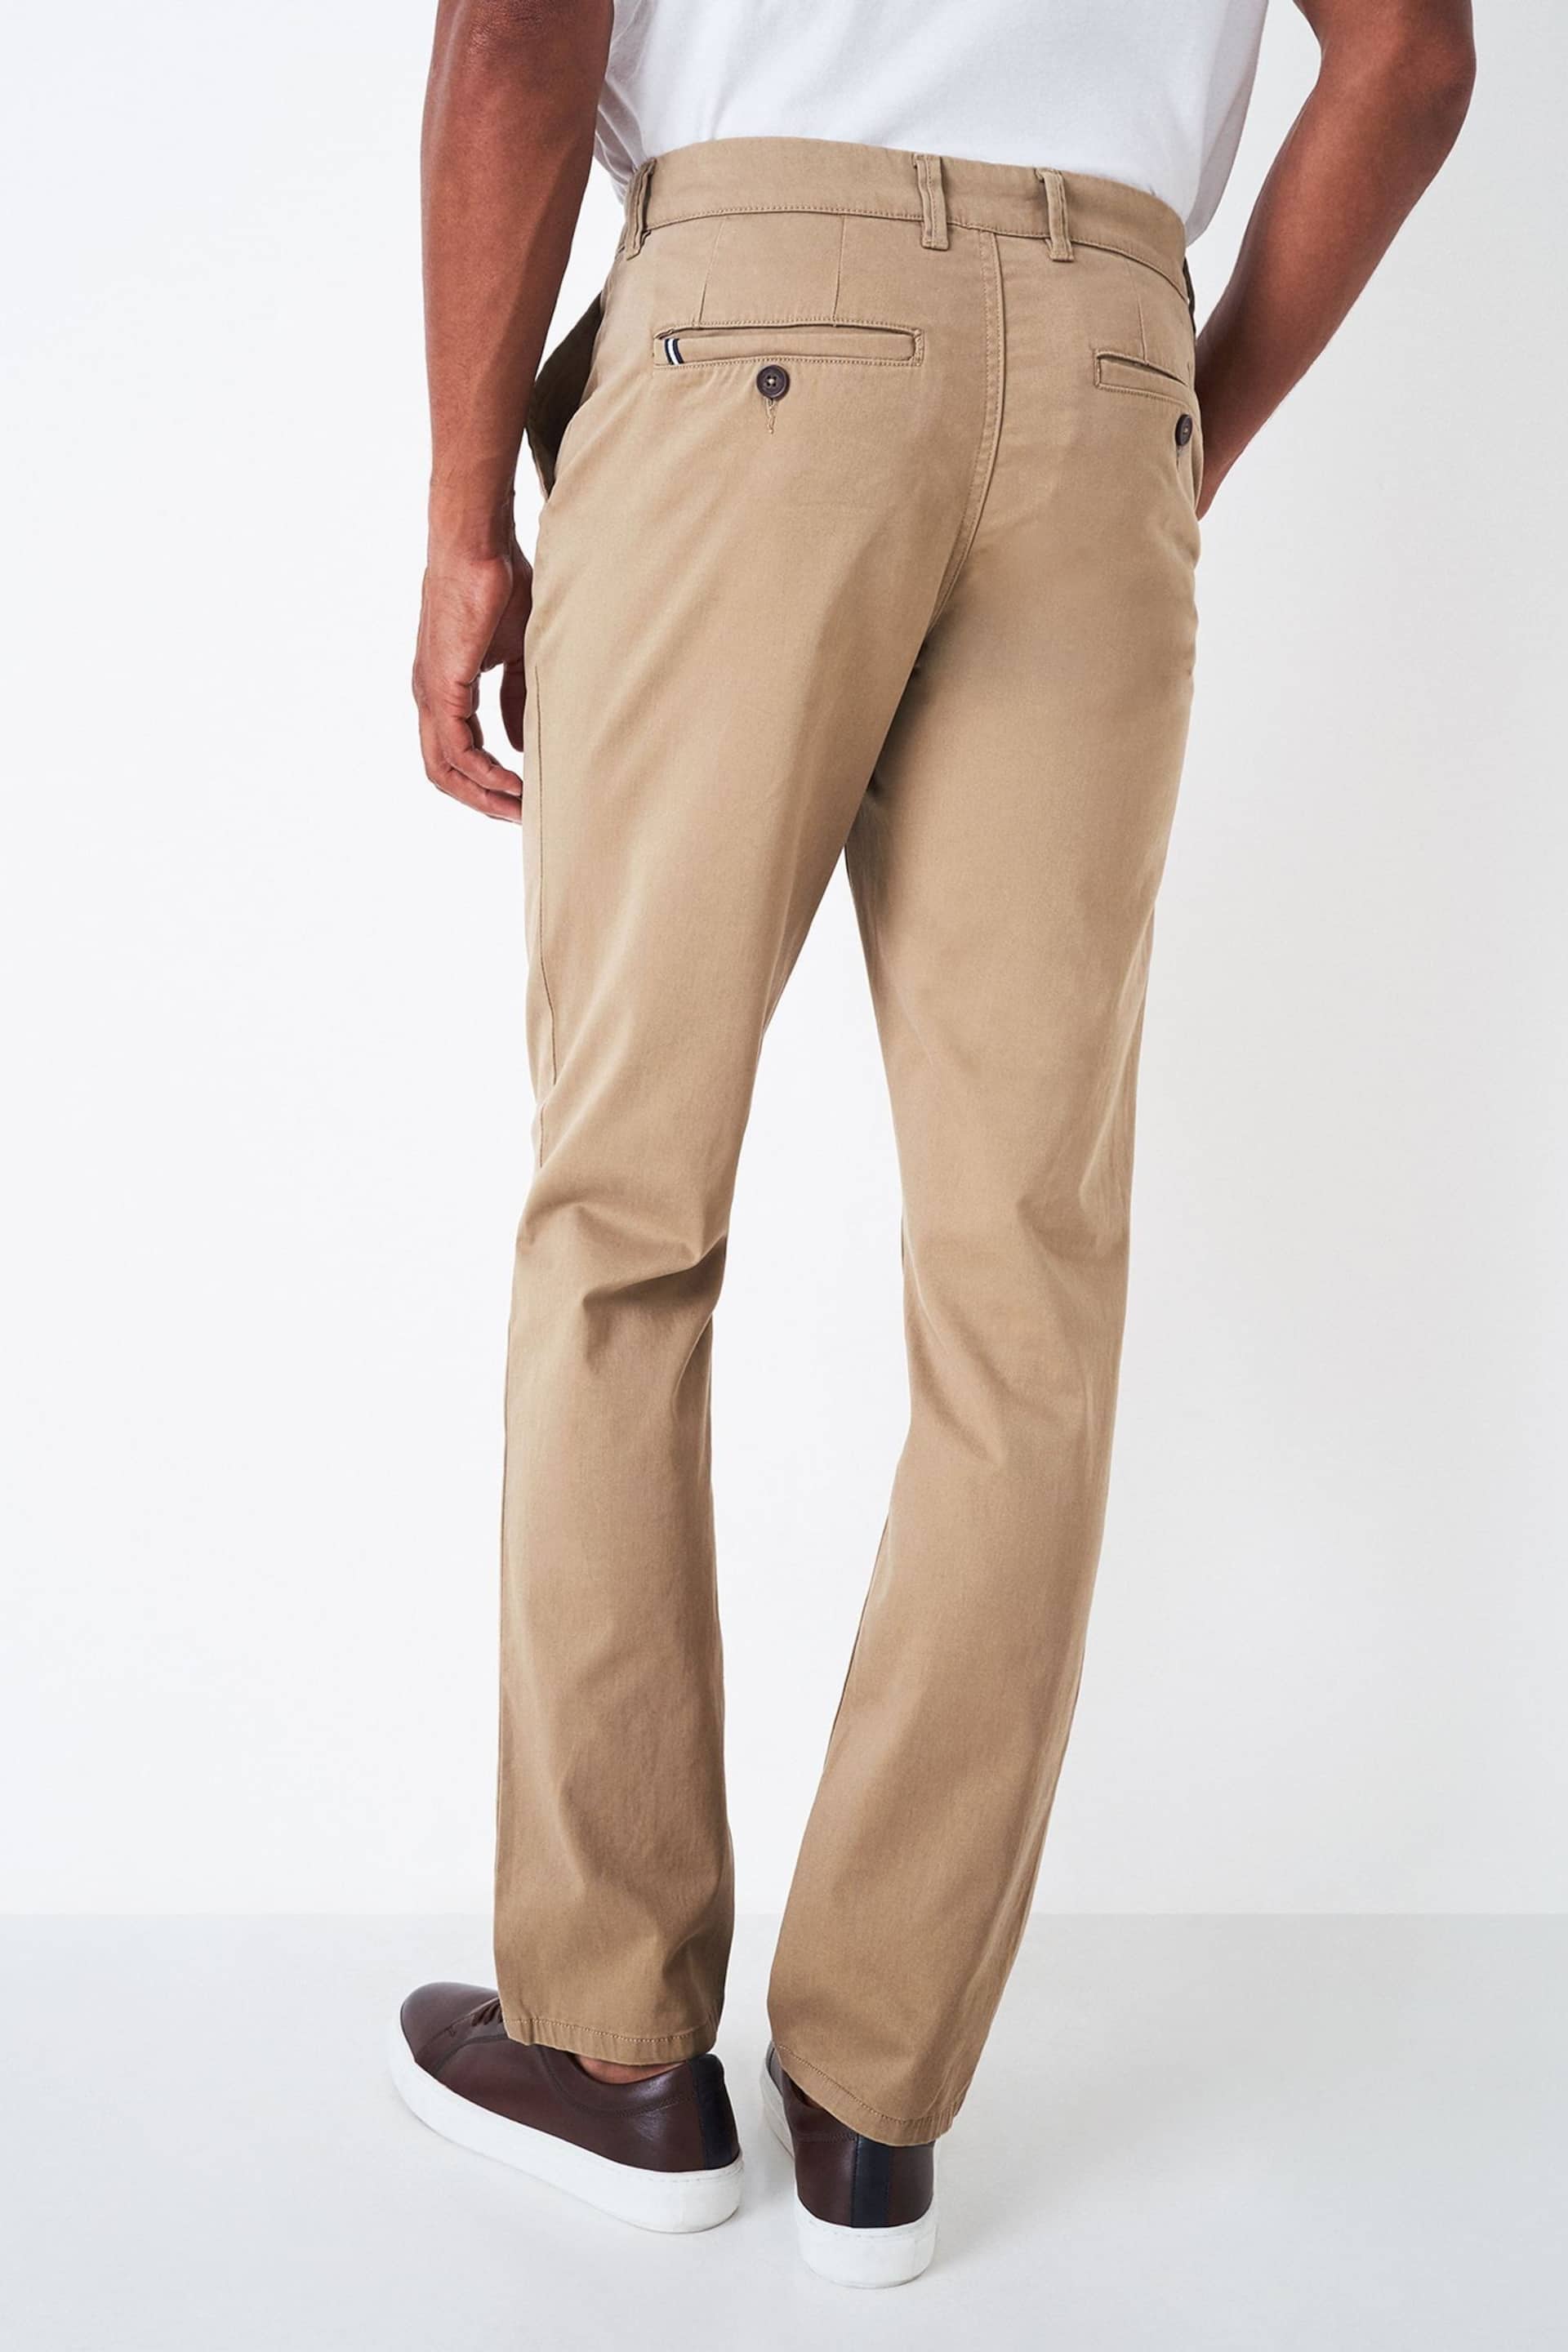 Buy Crew Clothing Company Cotton Straight Fit Chino Trousers - Image 2 of 4